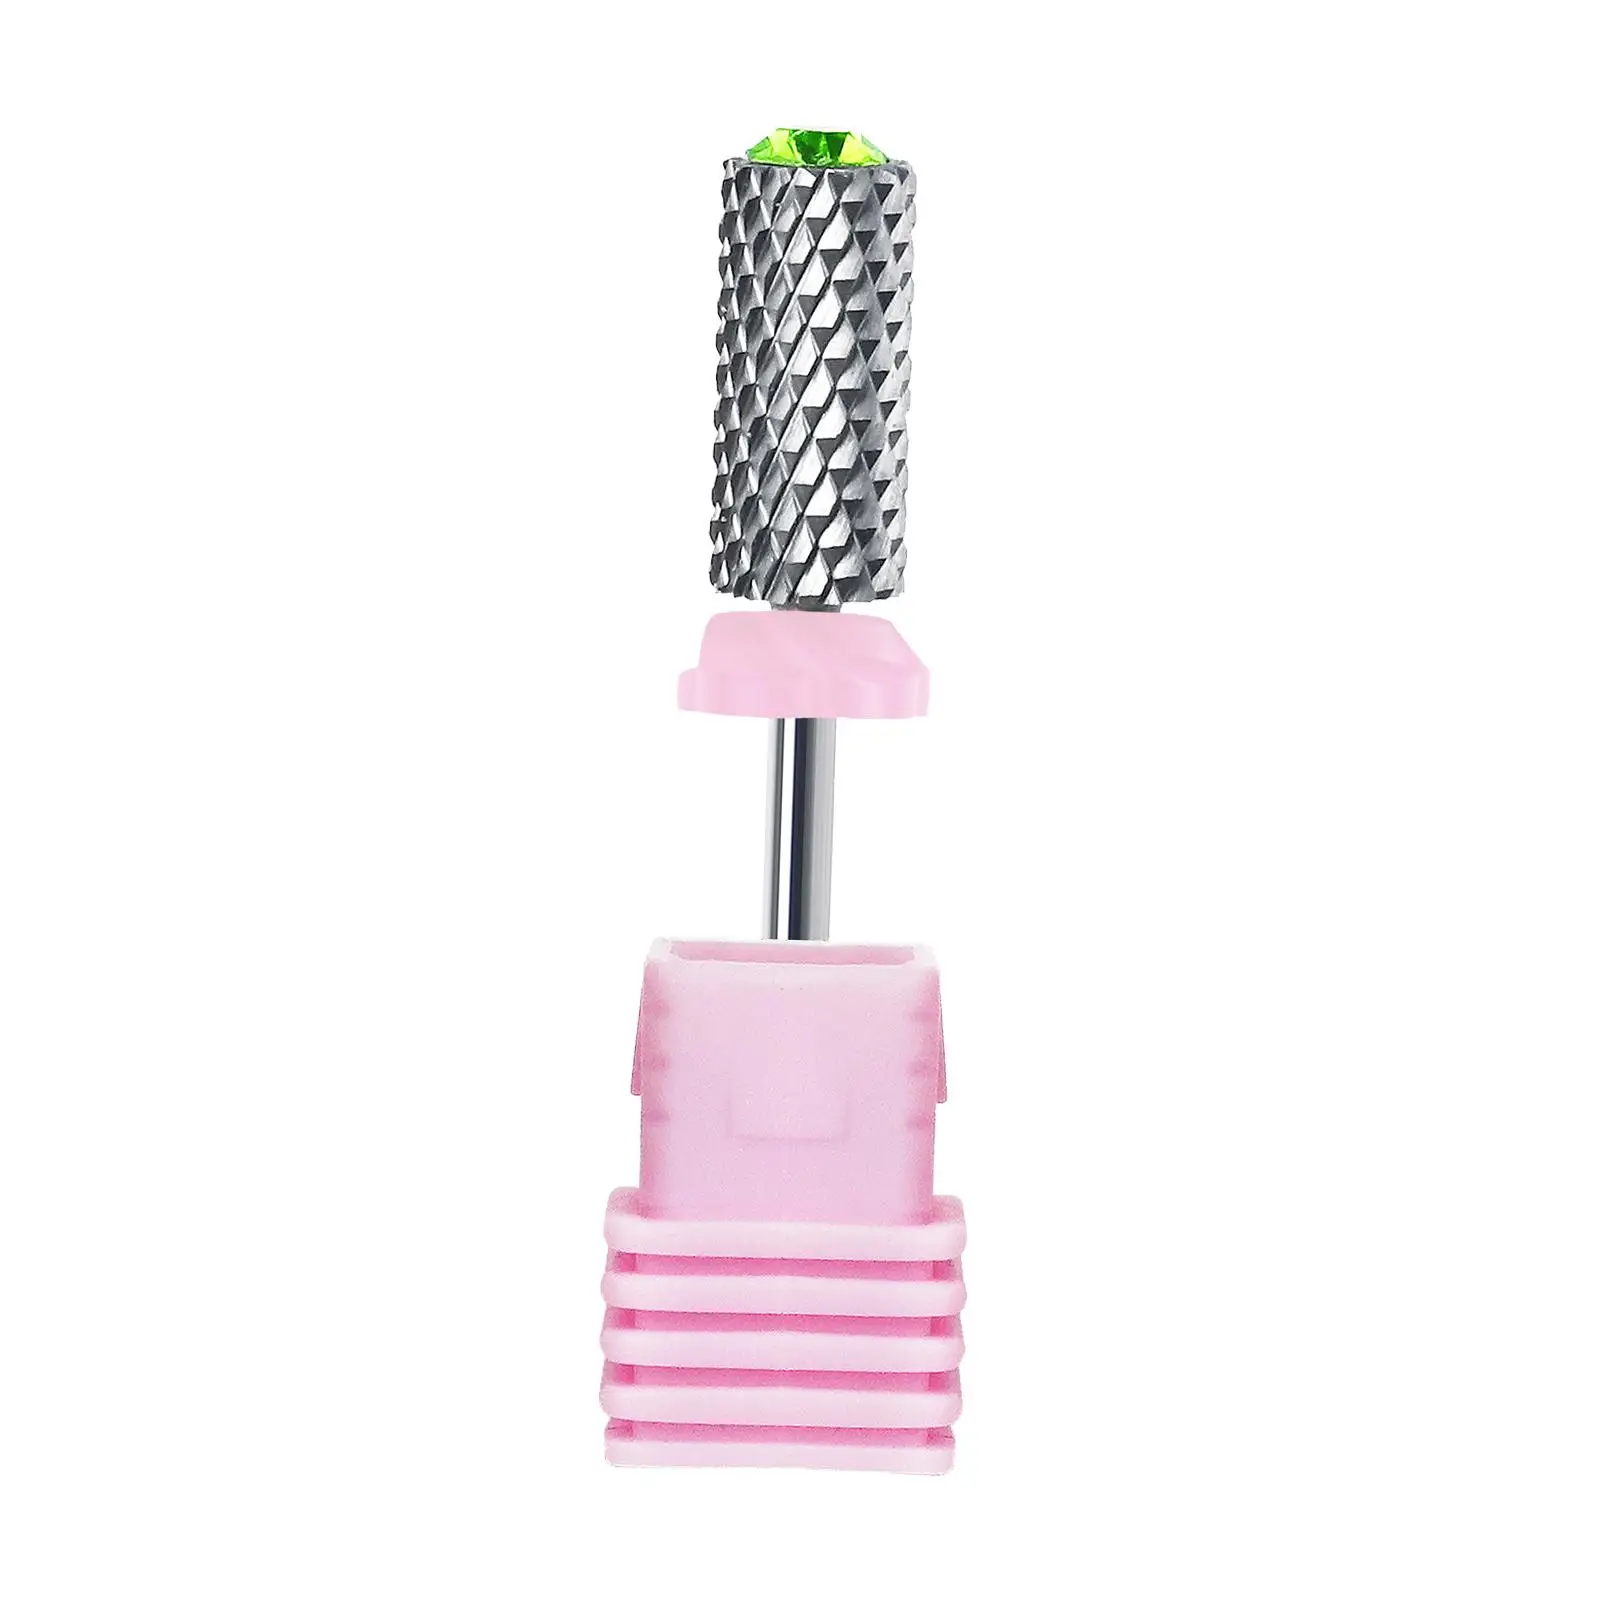 Nail Drill Bit Accessory Rotary Burrs Cuticle Remover Bit for Manicure Tool